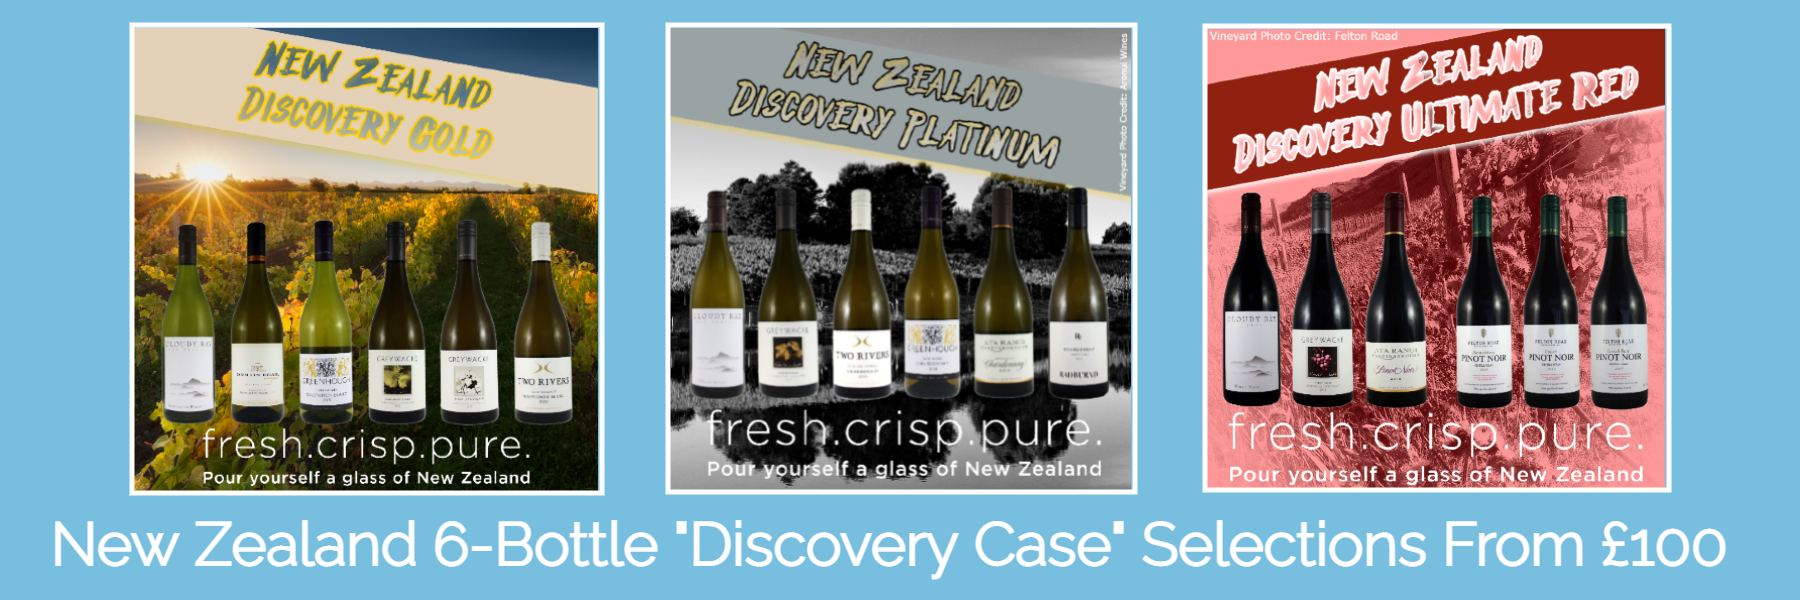 Frazier's New Zealand "Discovery Case" Six-Bottle Wine Selections